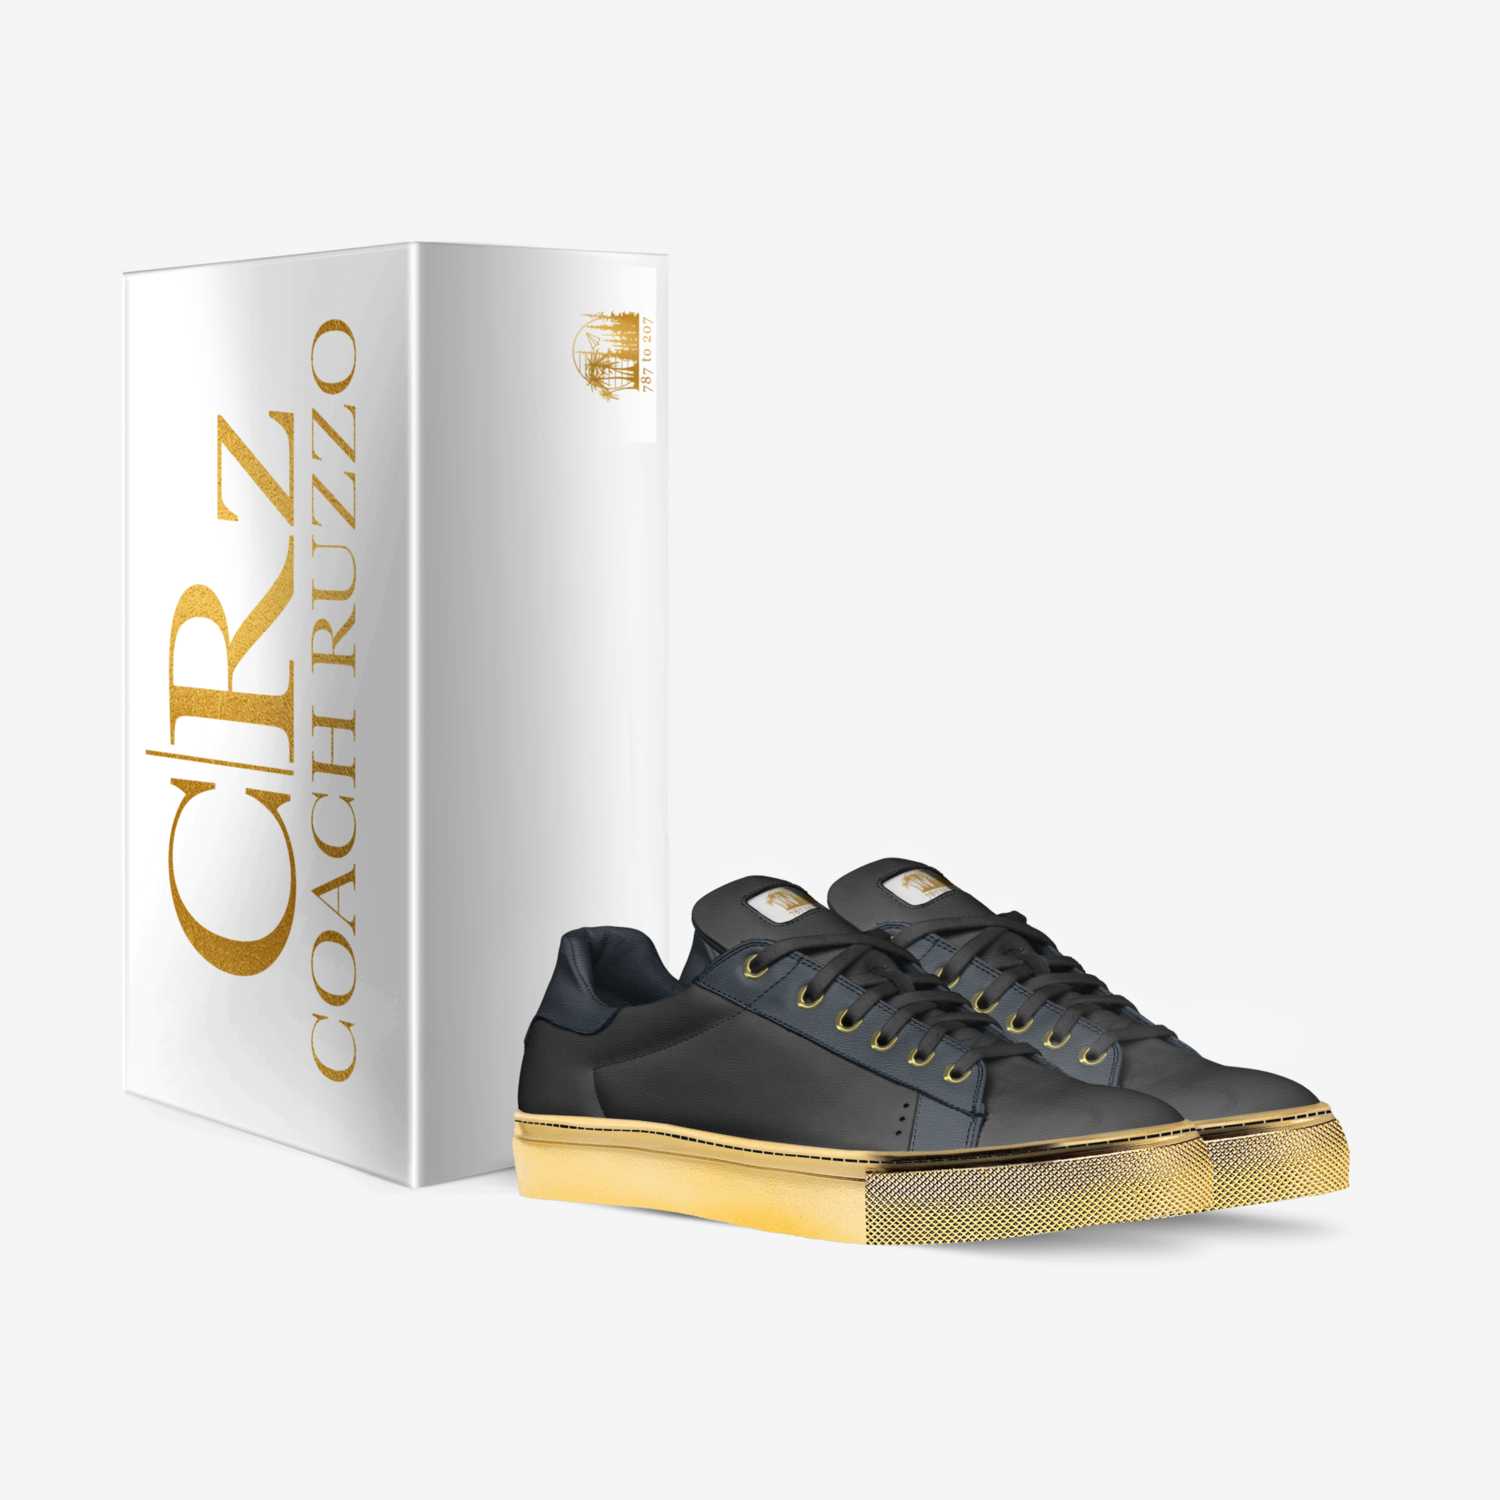 787 to 207 custom made in Italy shoes by Coach Ruzzo | Box view